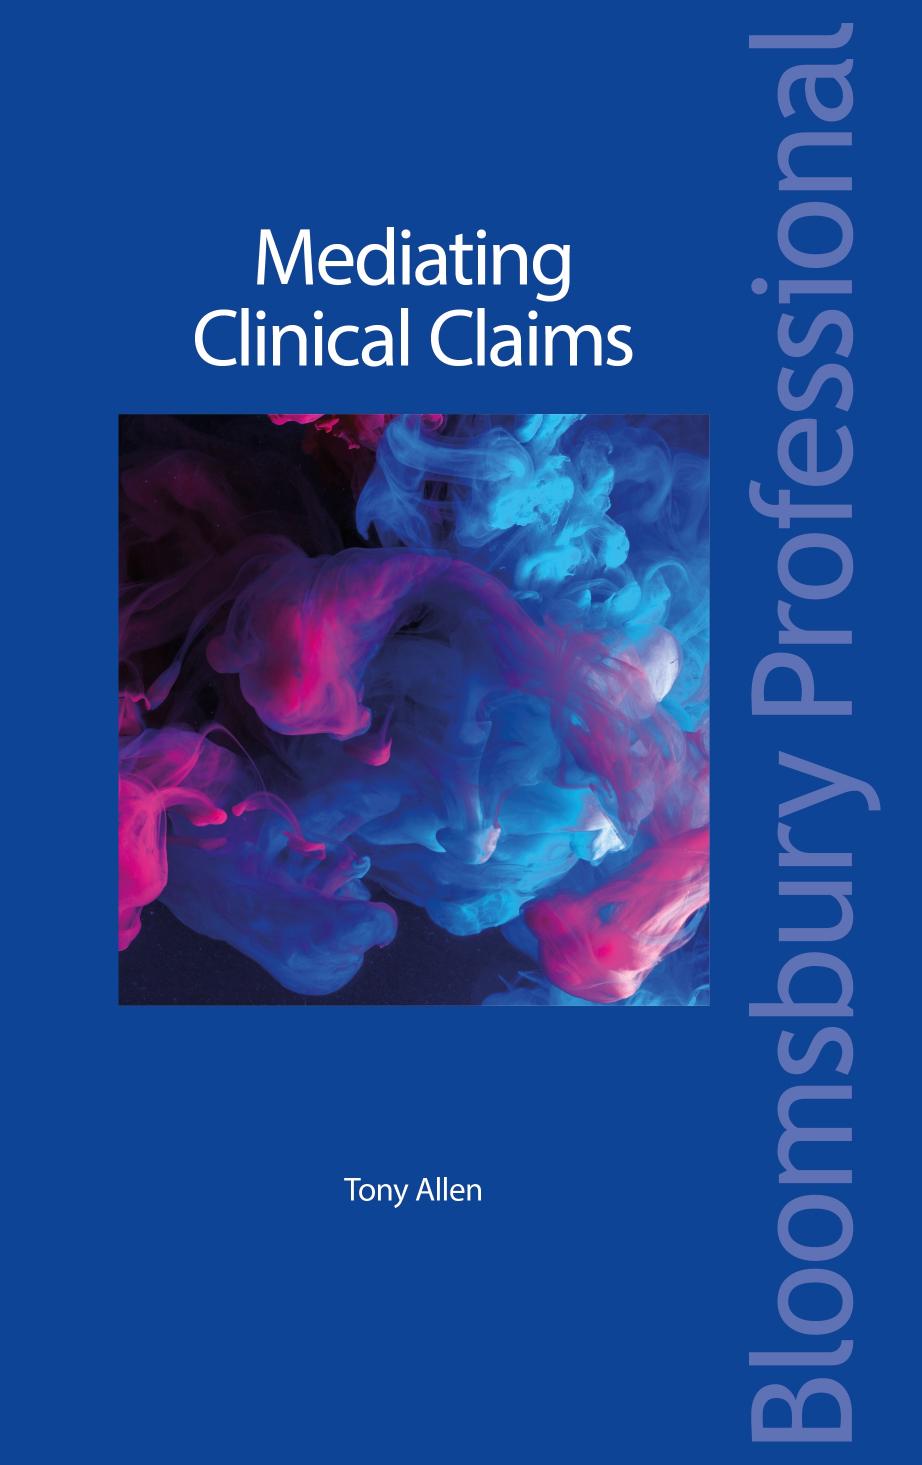 Mediating Clinical Claims by Tony Allen